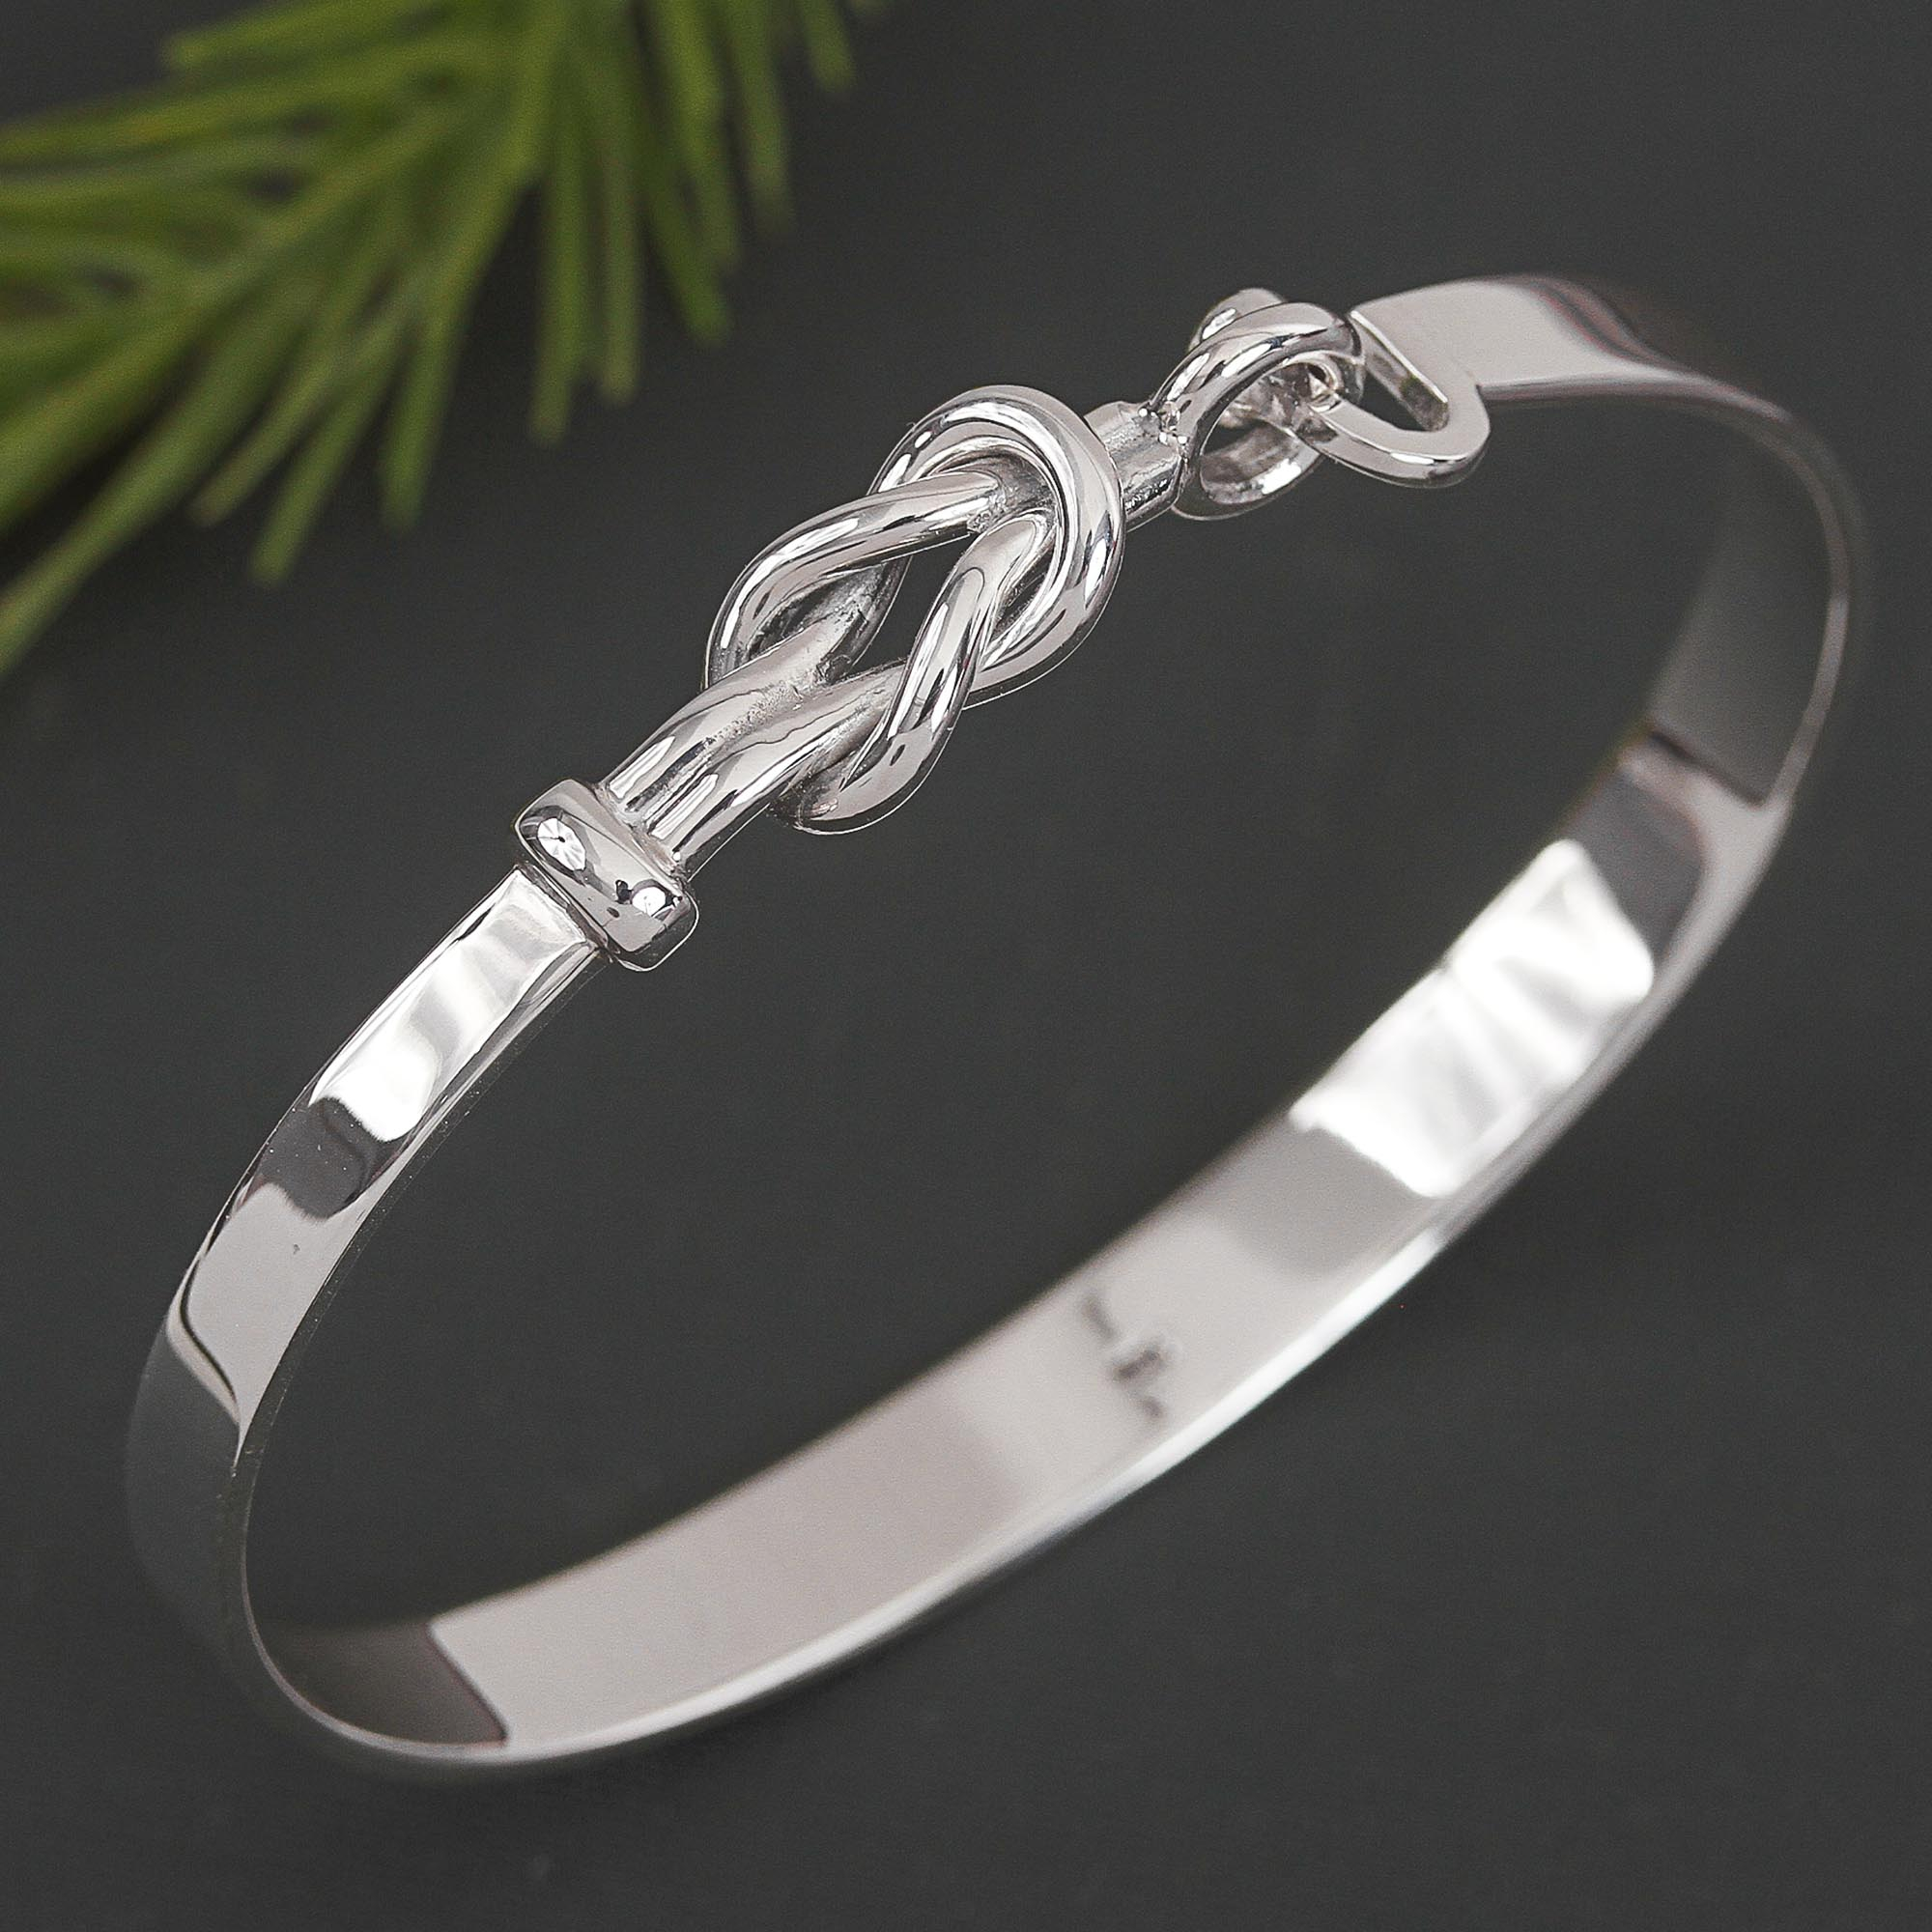 Real Solid 999 Sterling Silver Cuff Bracelet Truelove Knot Buddhist Scripture